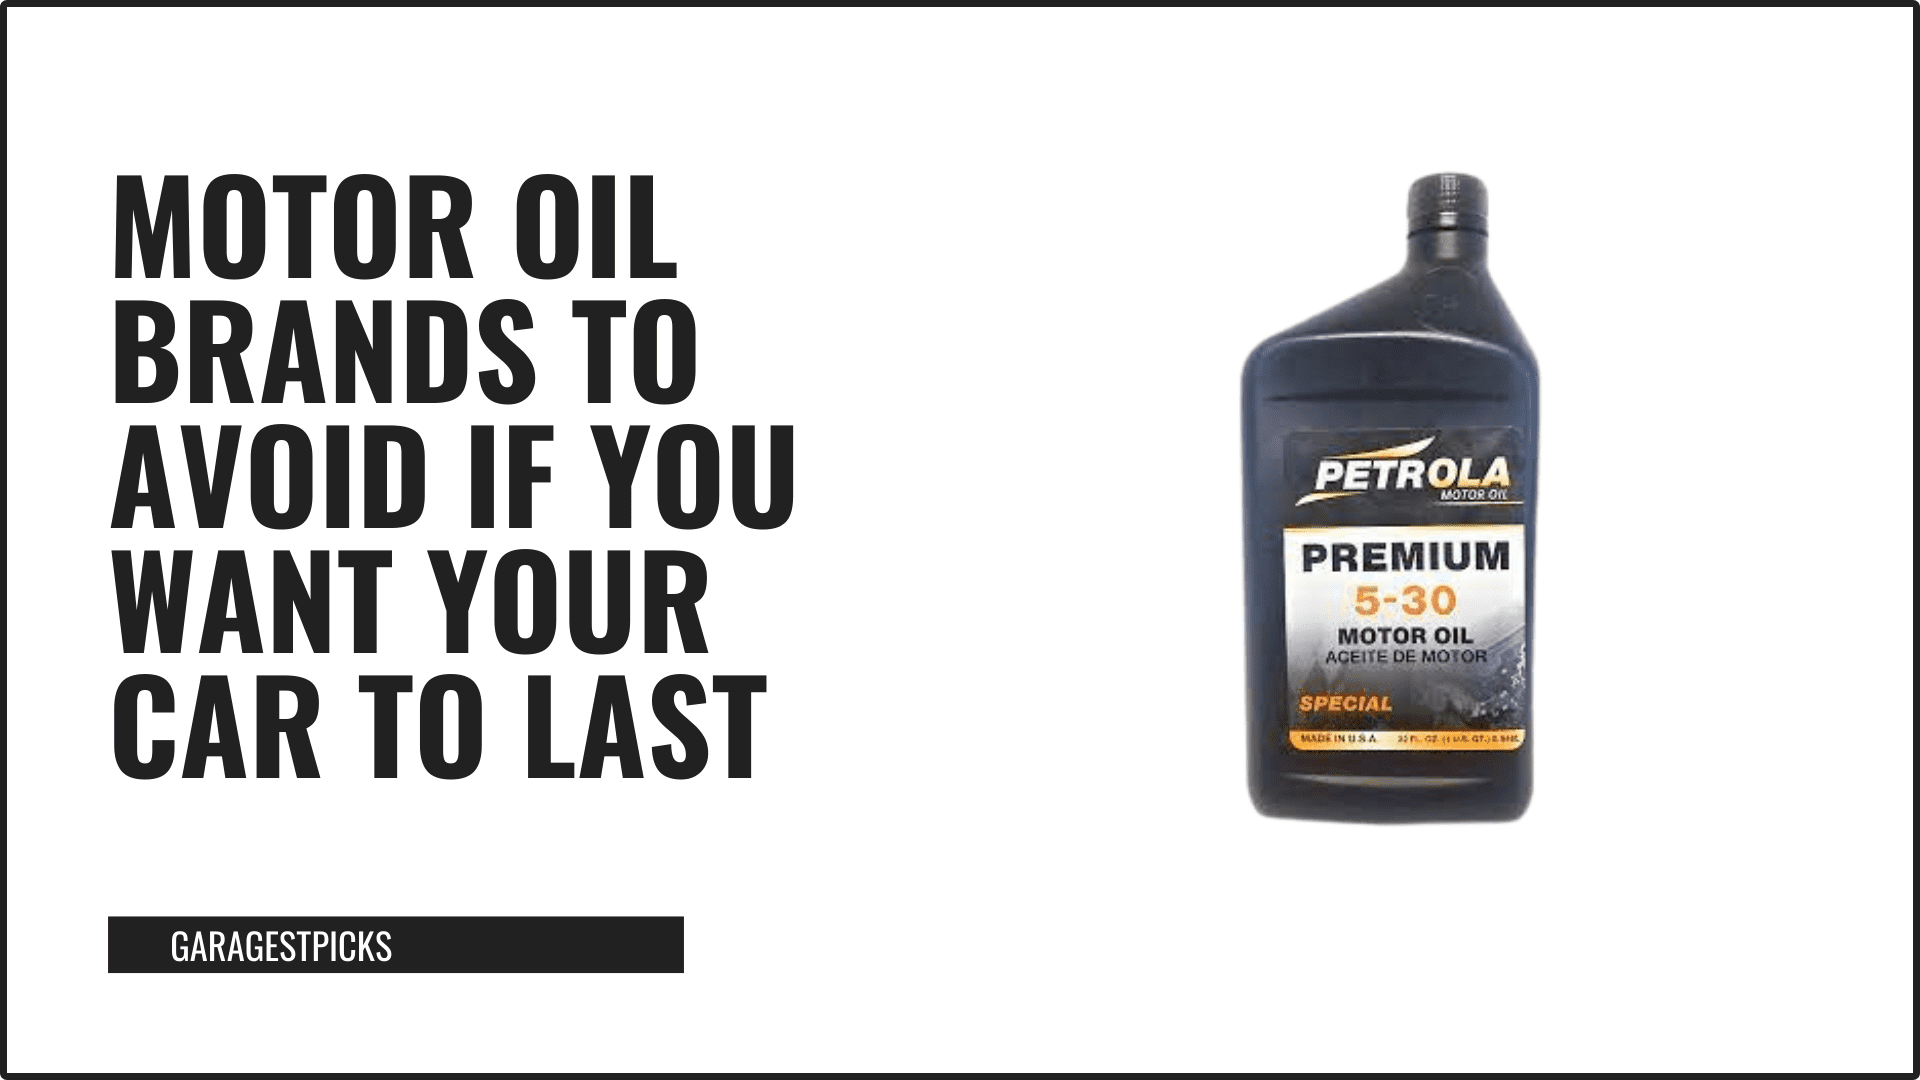 Motor Oil Brands to Avoid in black text on white background with image of oil bottle